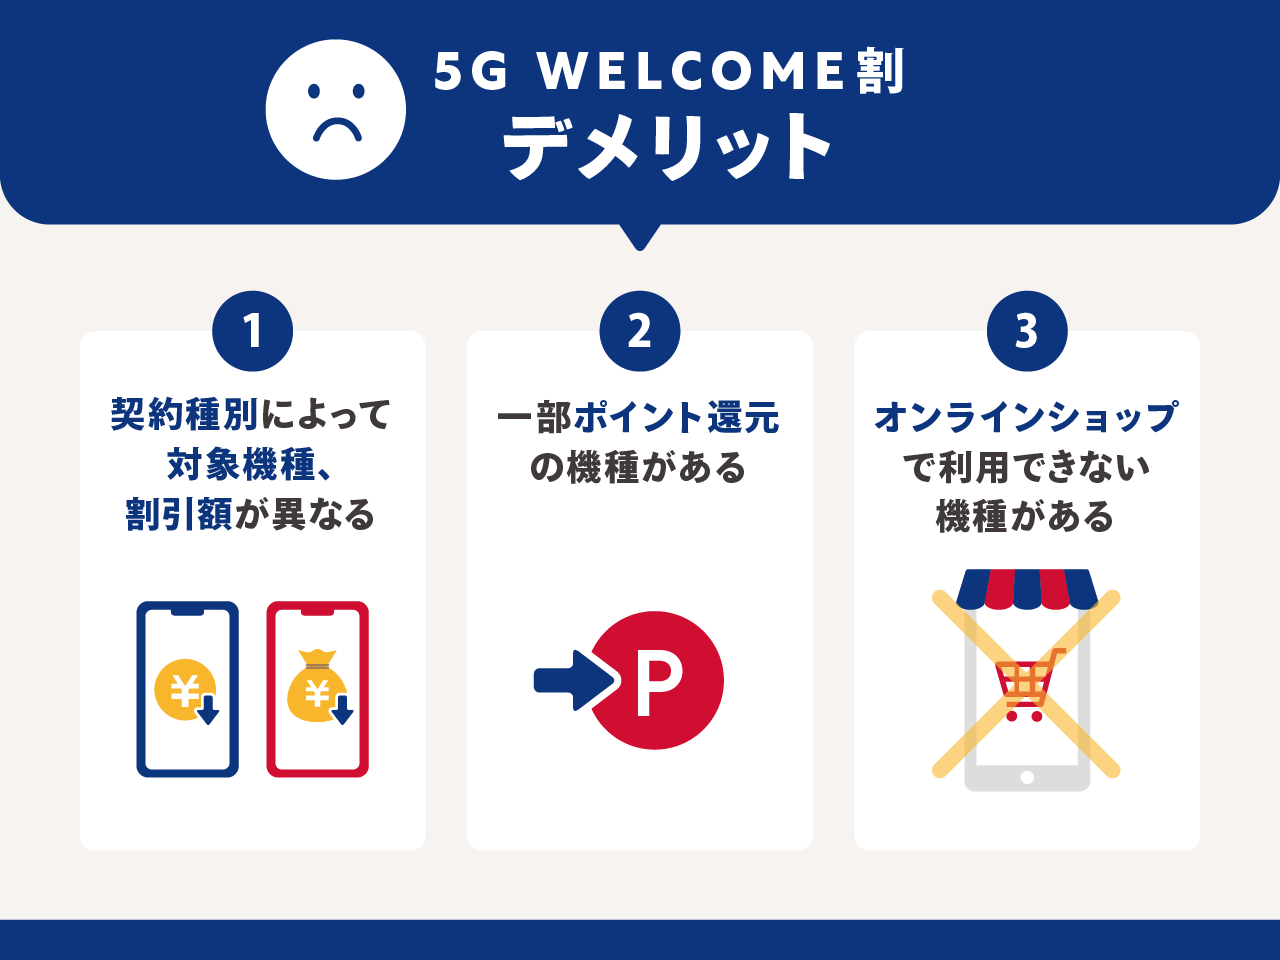 5G WELCOME割のデメリット